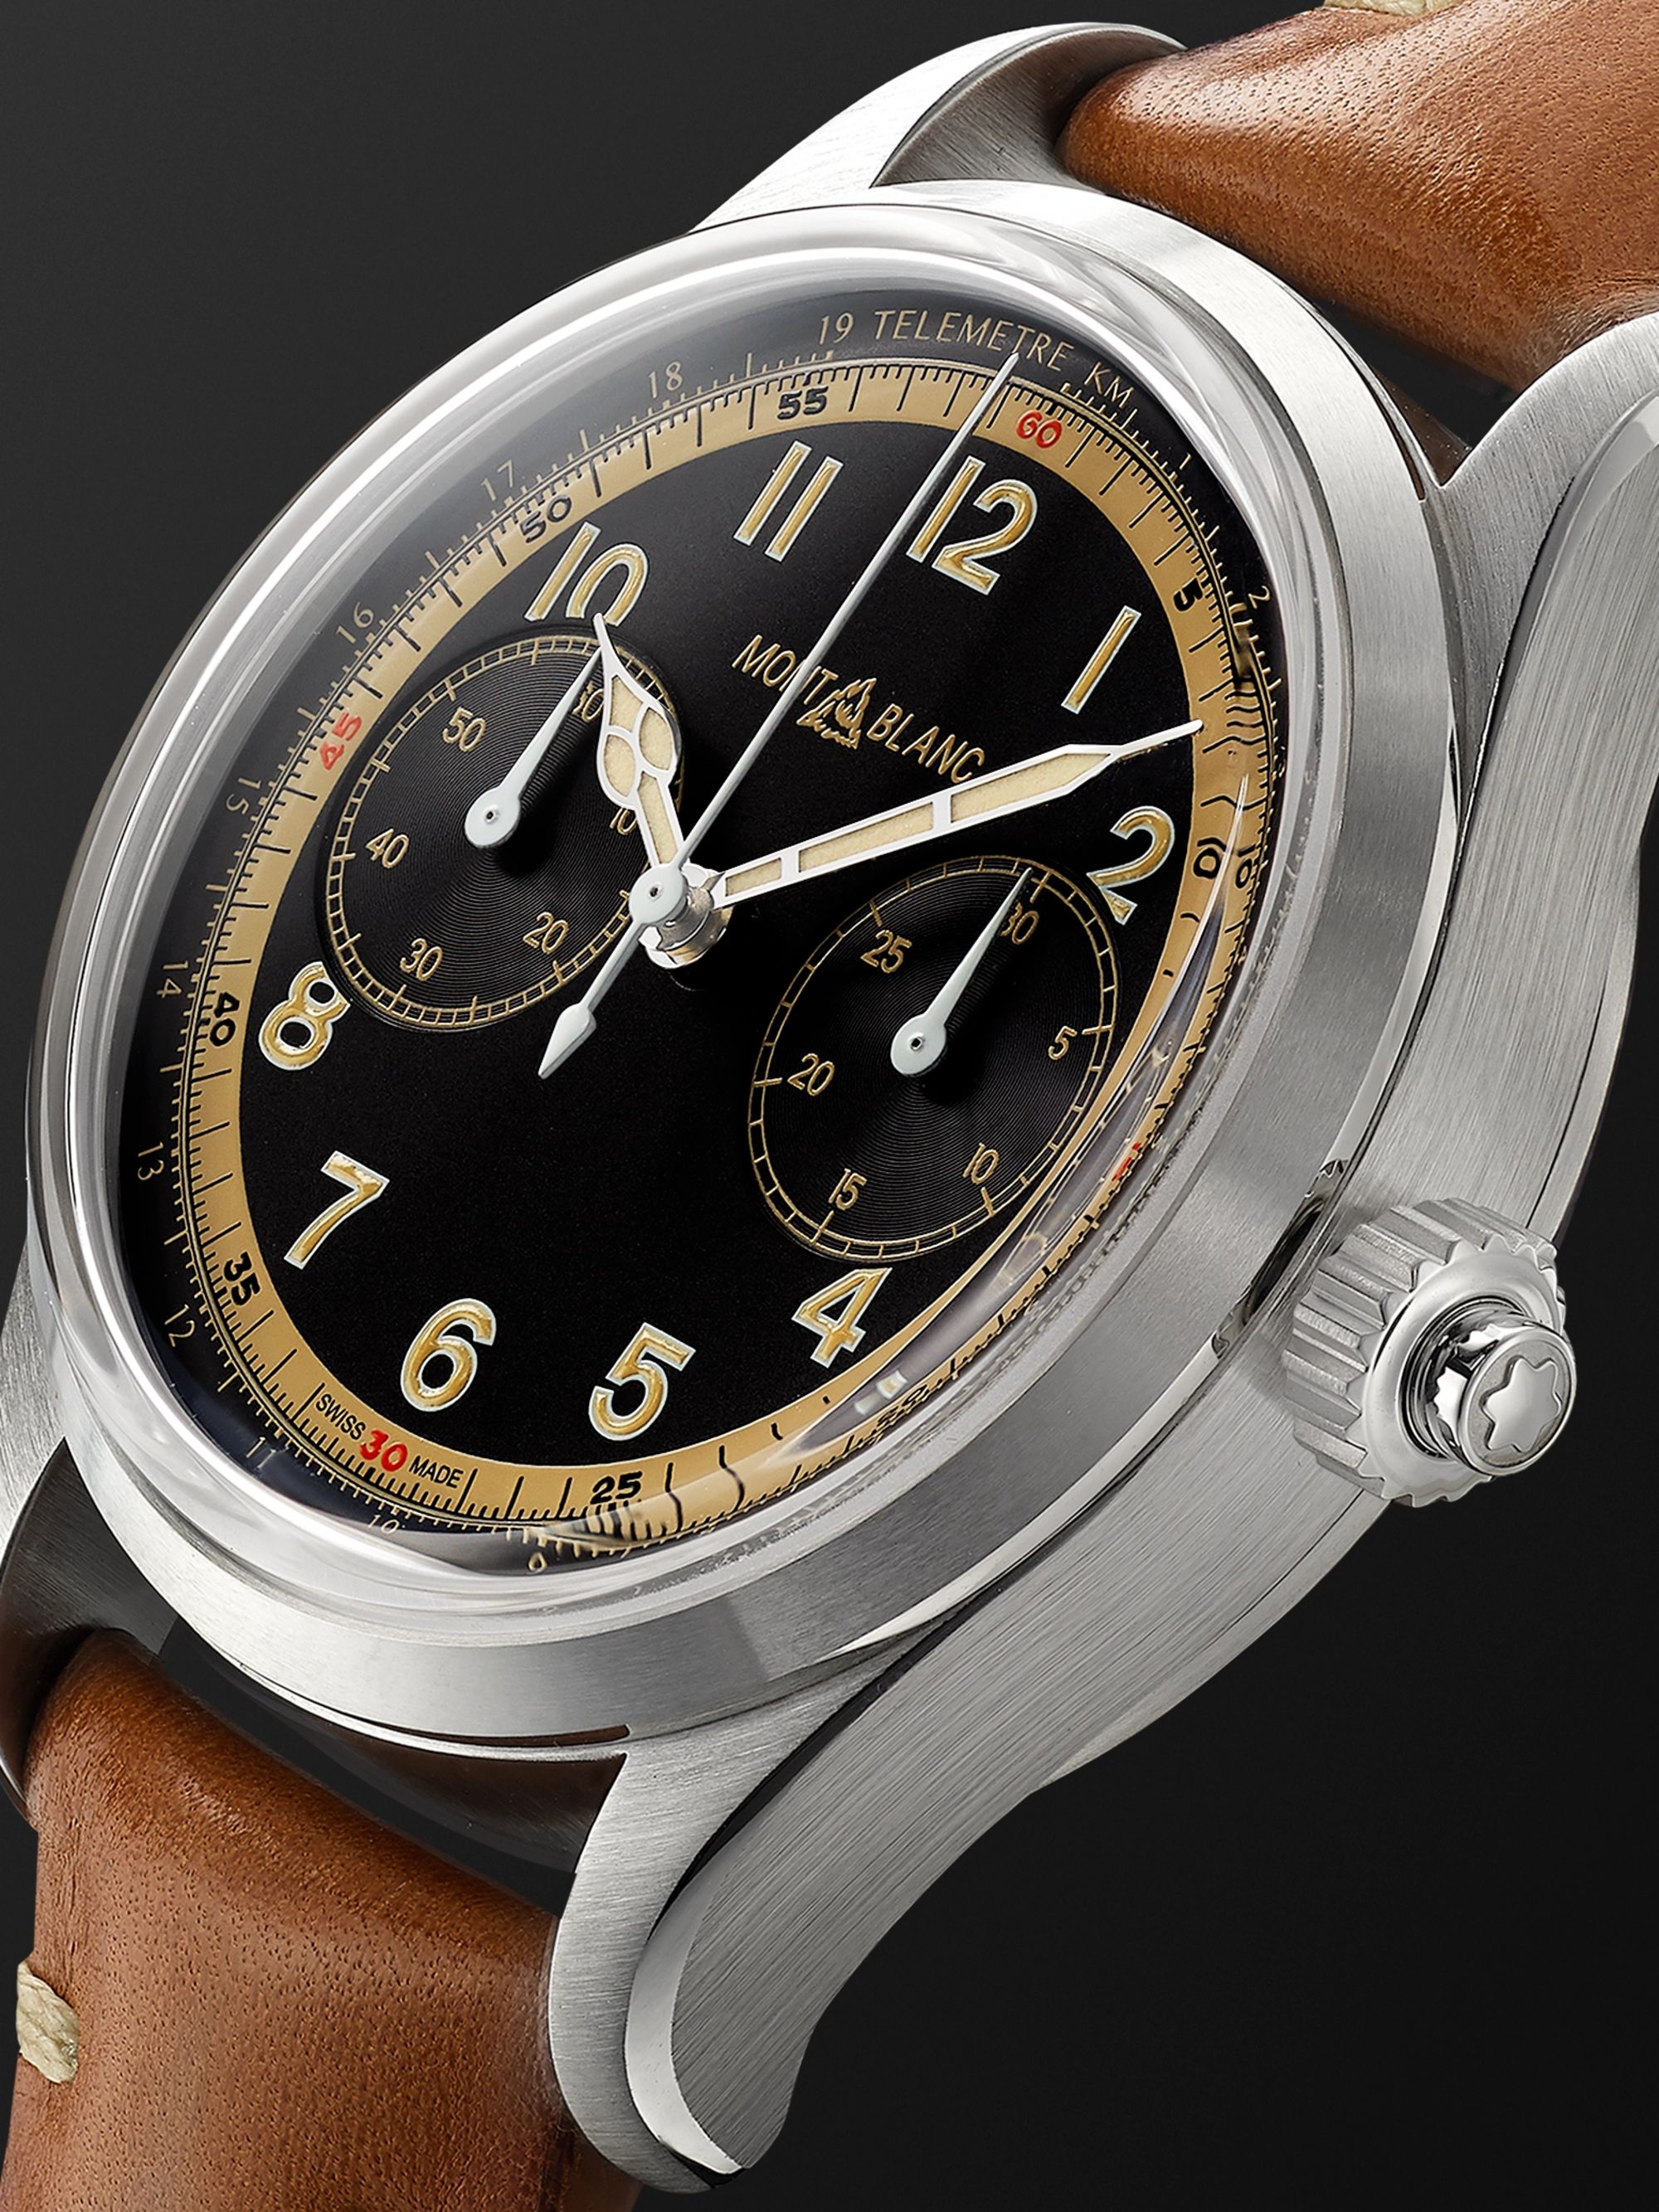 MONTBLANC 1858 Monopusher Automatic Chronograph 42mm Stainless Steel and Leather Watch, Ref. No. 125581